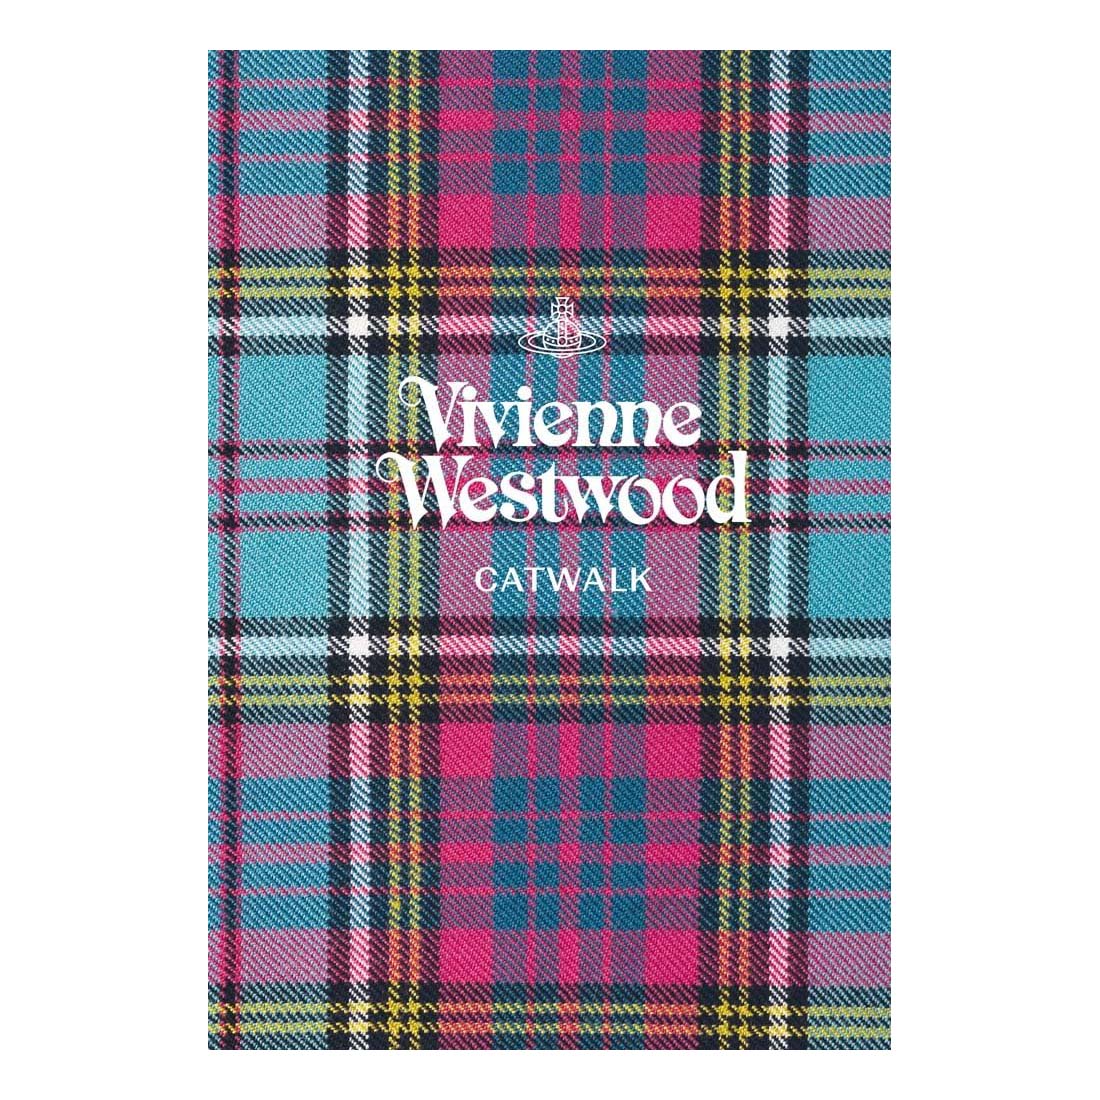 Vivienne Westwood: The Complete Collections